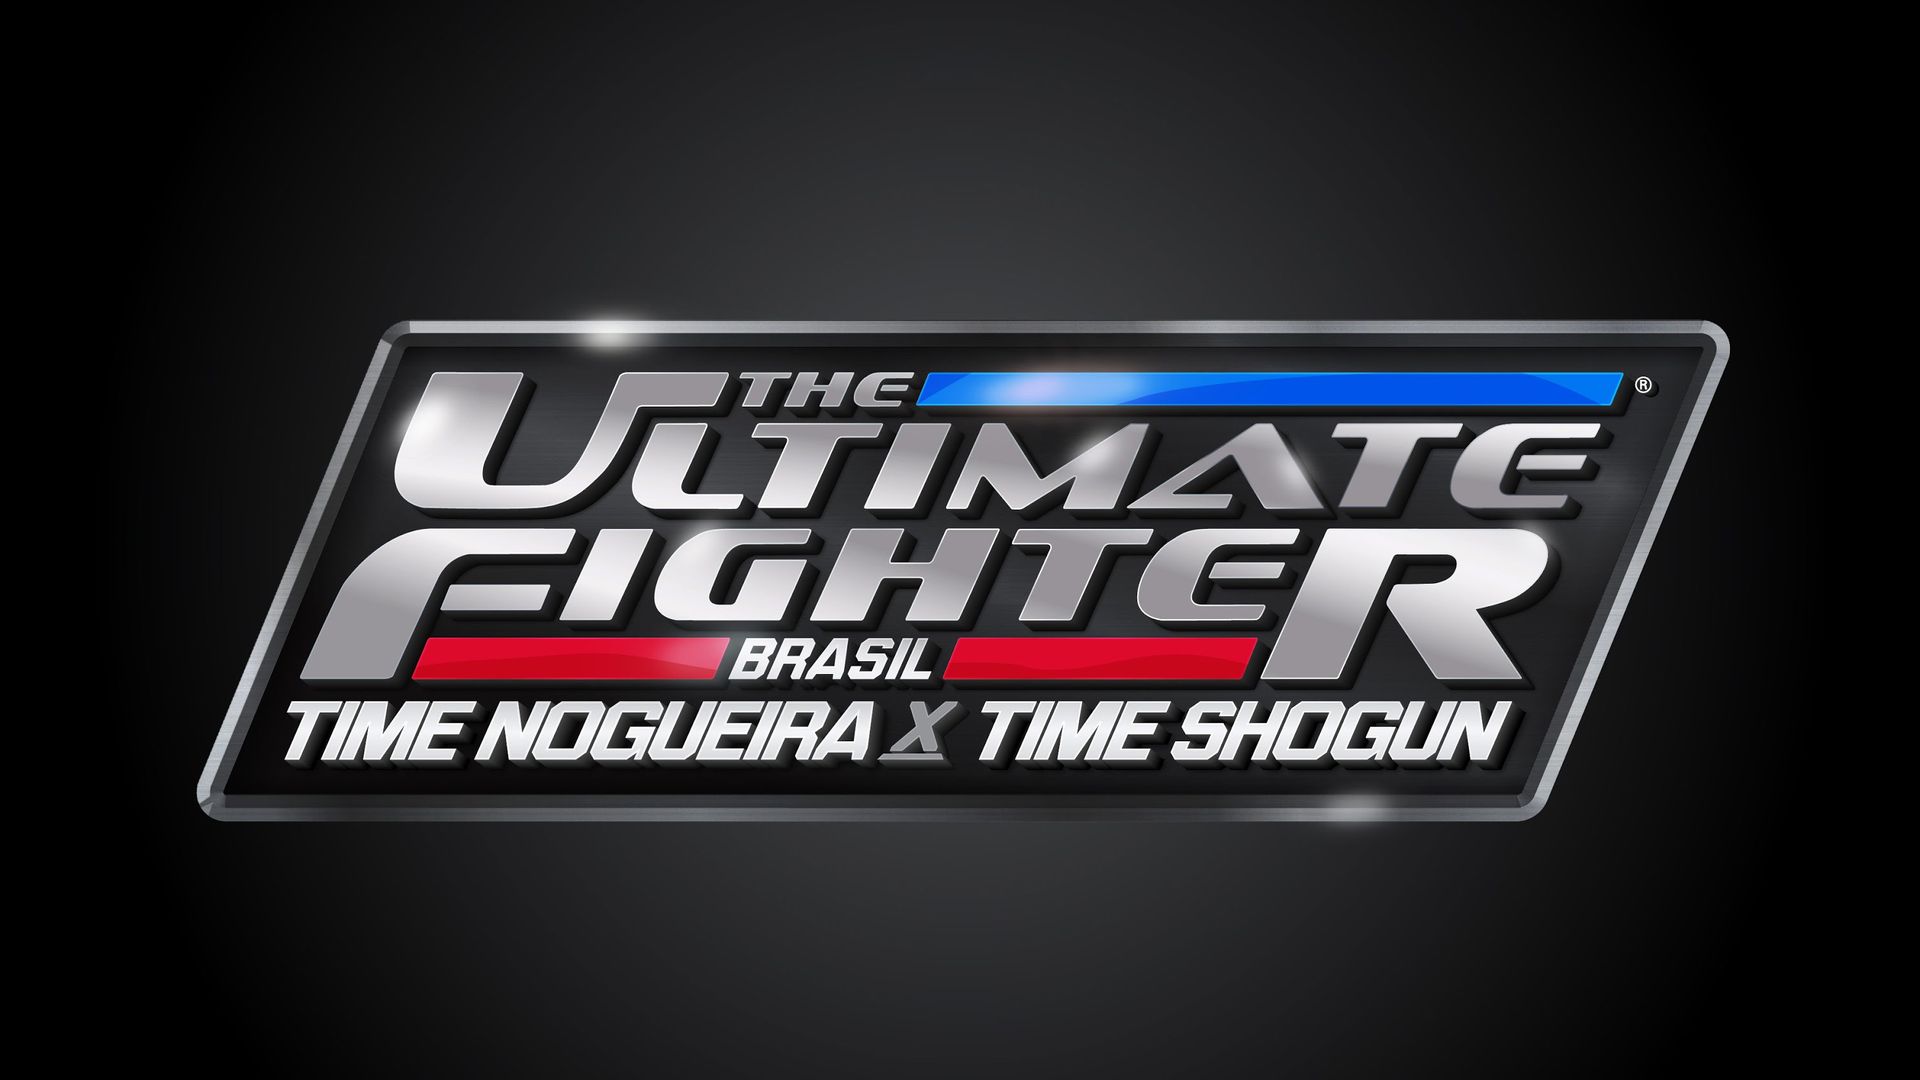 The Ultimate Fighter: Brazil background